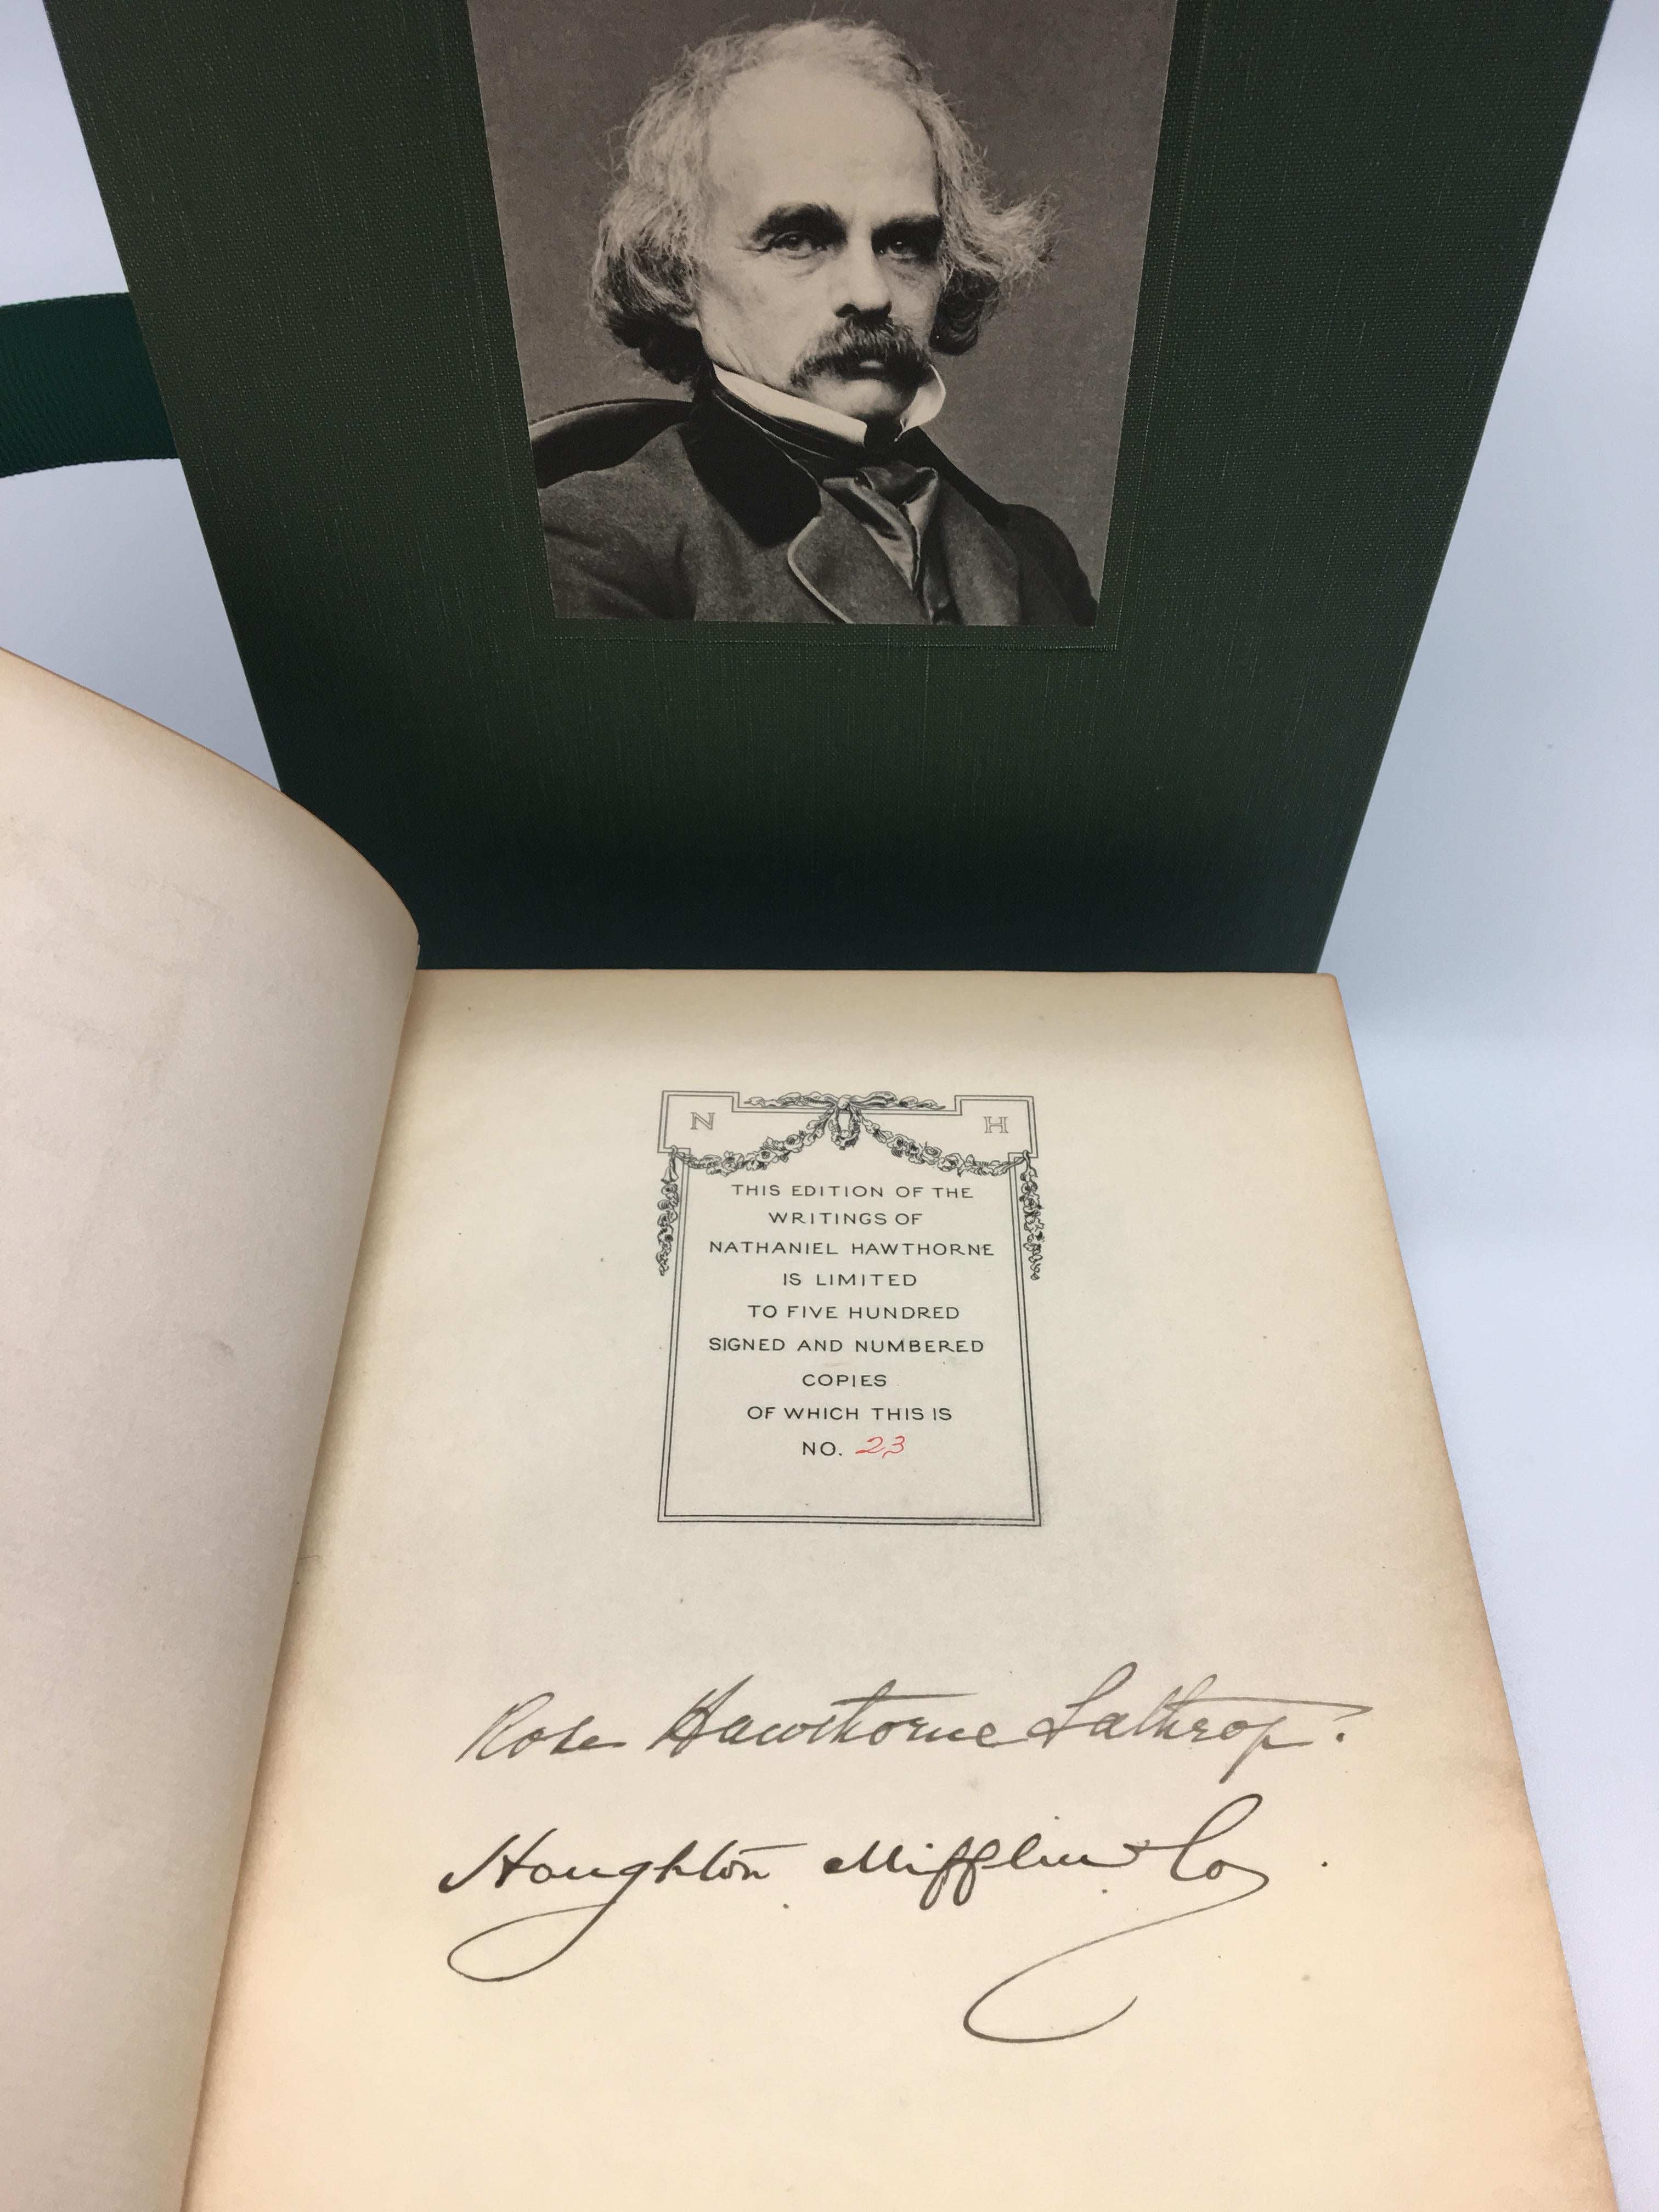 The Complete Writings of Nathaniel Hawthorne, Autograph Edition #23/500, 22 Vols., 1900

Hawthorne, Nathaniel, The Complete Writings of Nathaniel Hawthorne. Boston: Houghton, Mifflin & Company, 1900. 22 volume set, limited autograph edition, #23 of